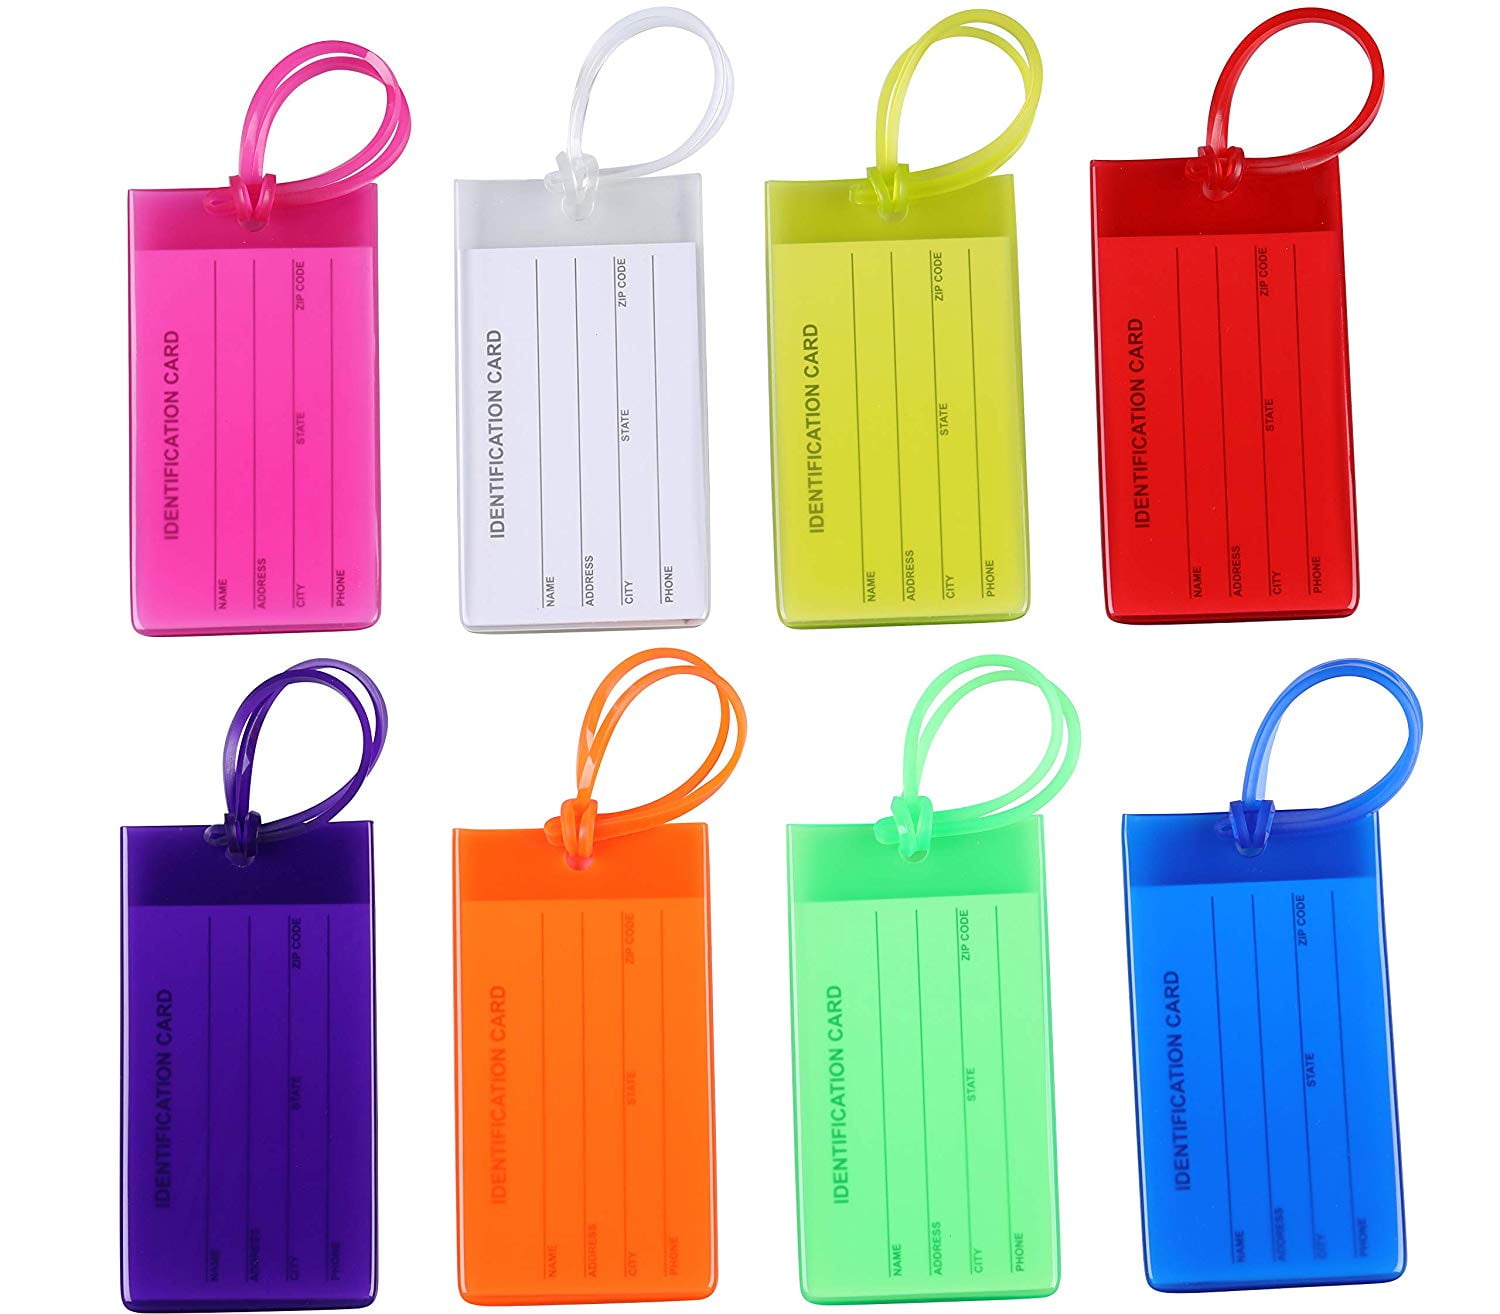 5 PCS Luggage Tag Suitcase Label Travel ID Bag Tag Color 